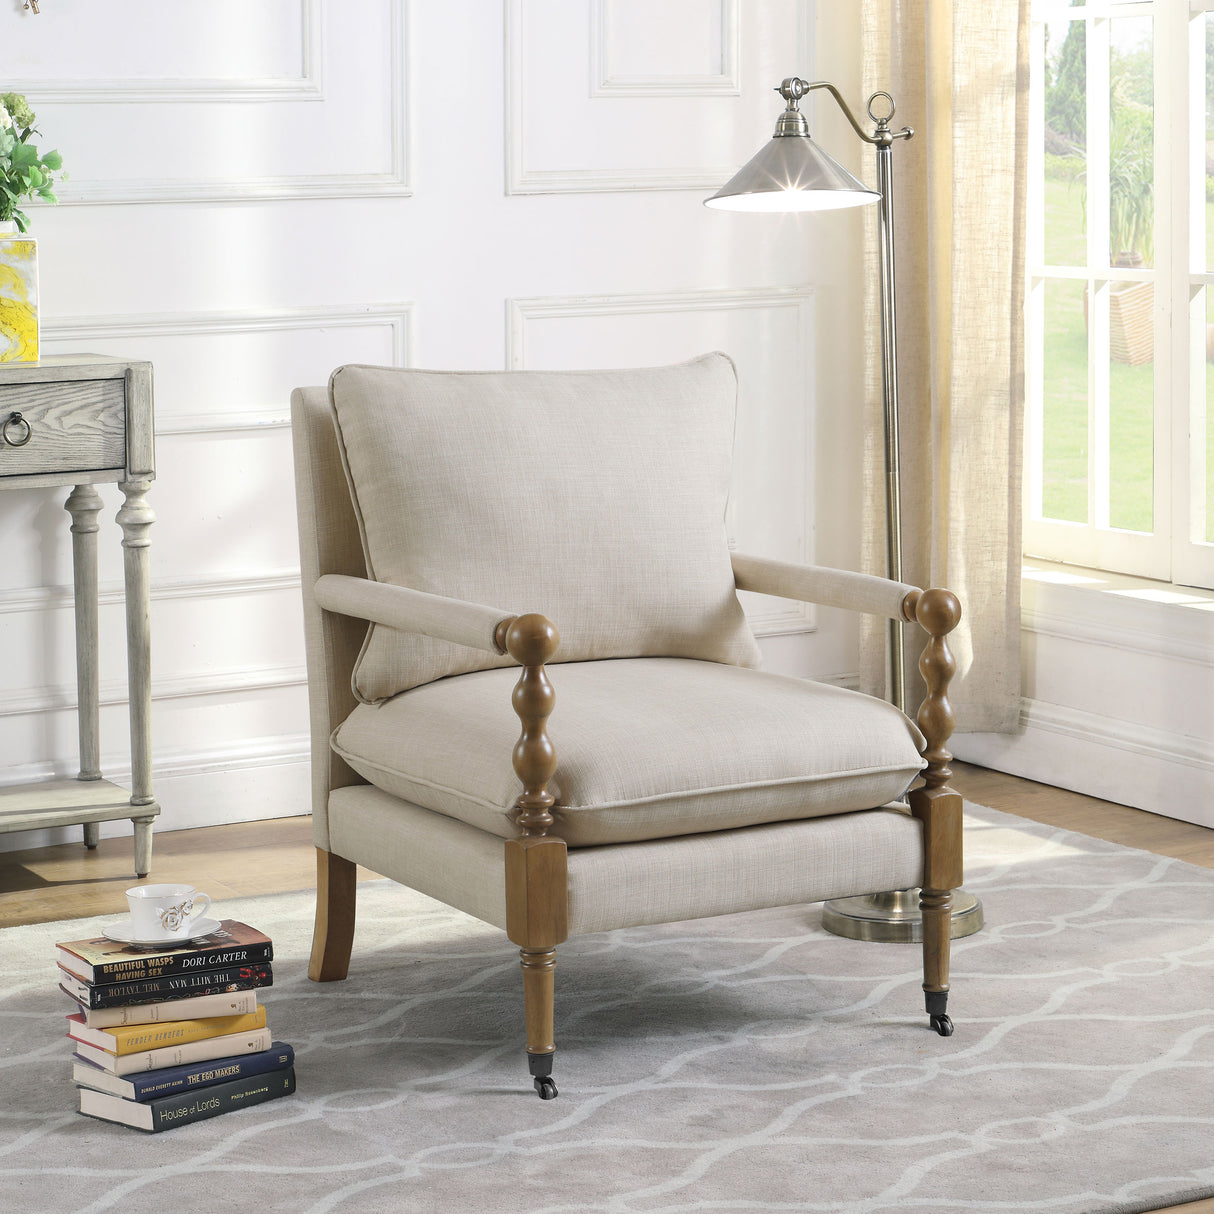 Accent Chair - Dempsy Upholstered Accent Chair with Casters Beige